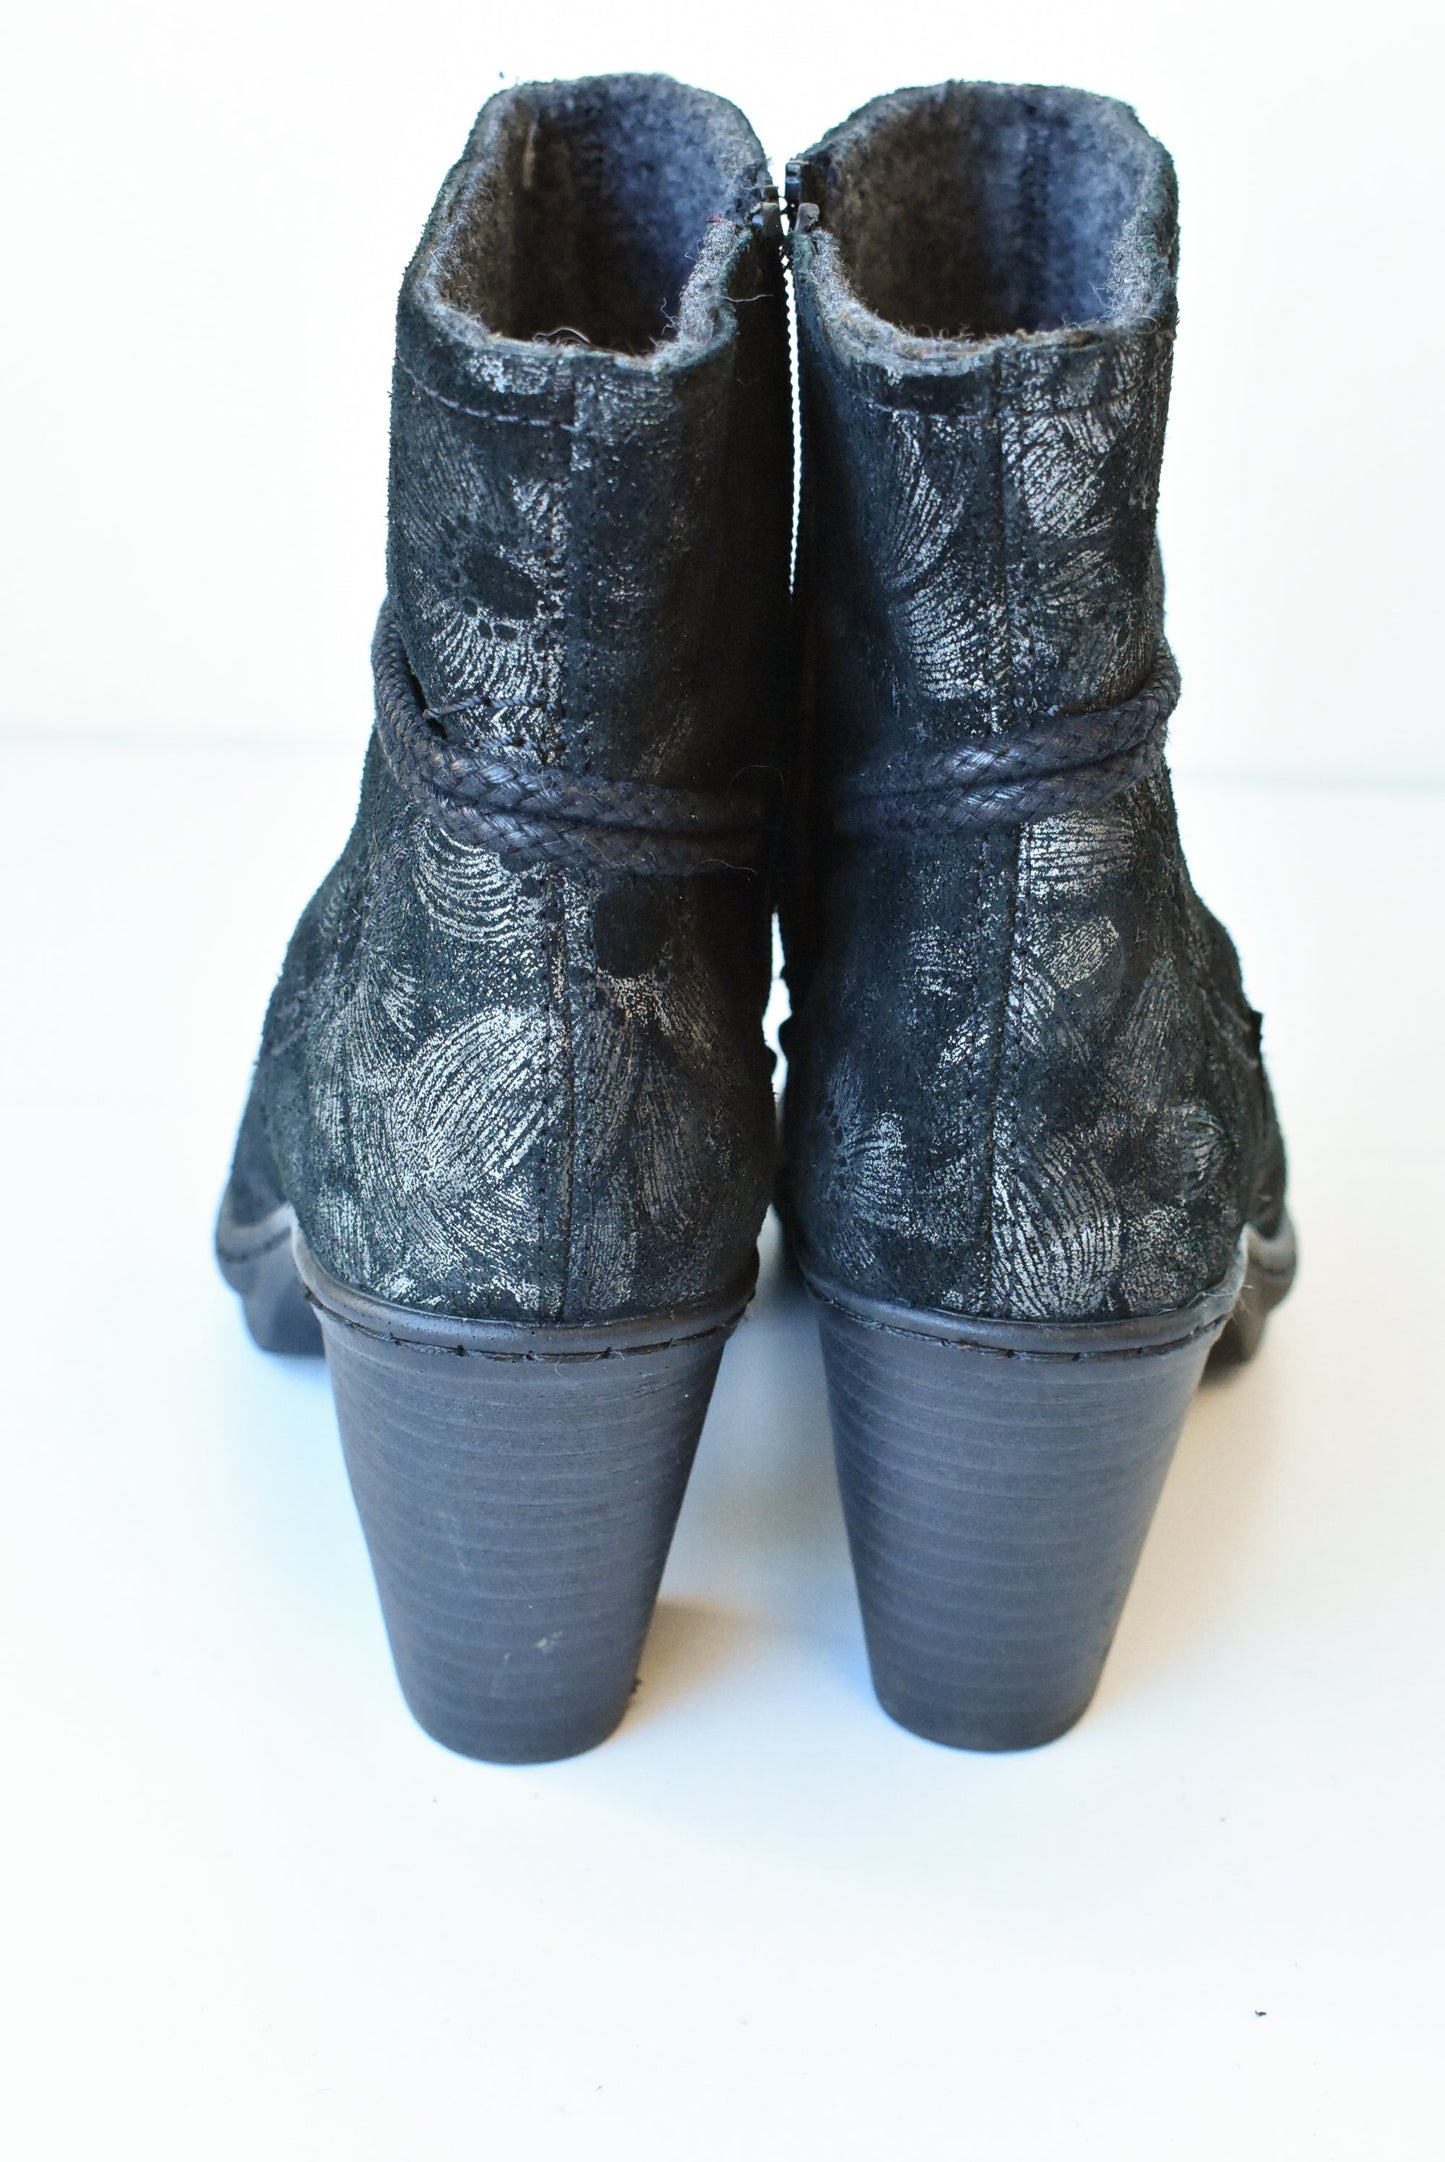 Rieker floral heeled boots, size 37